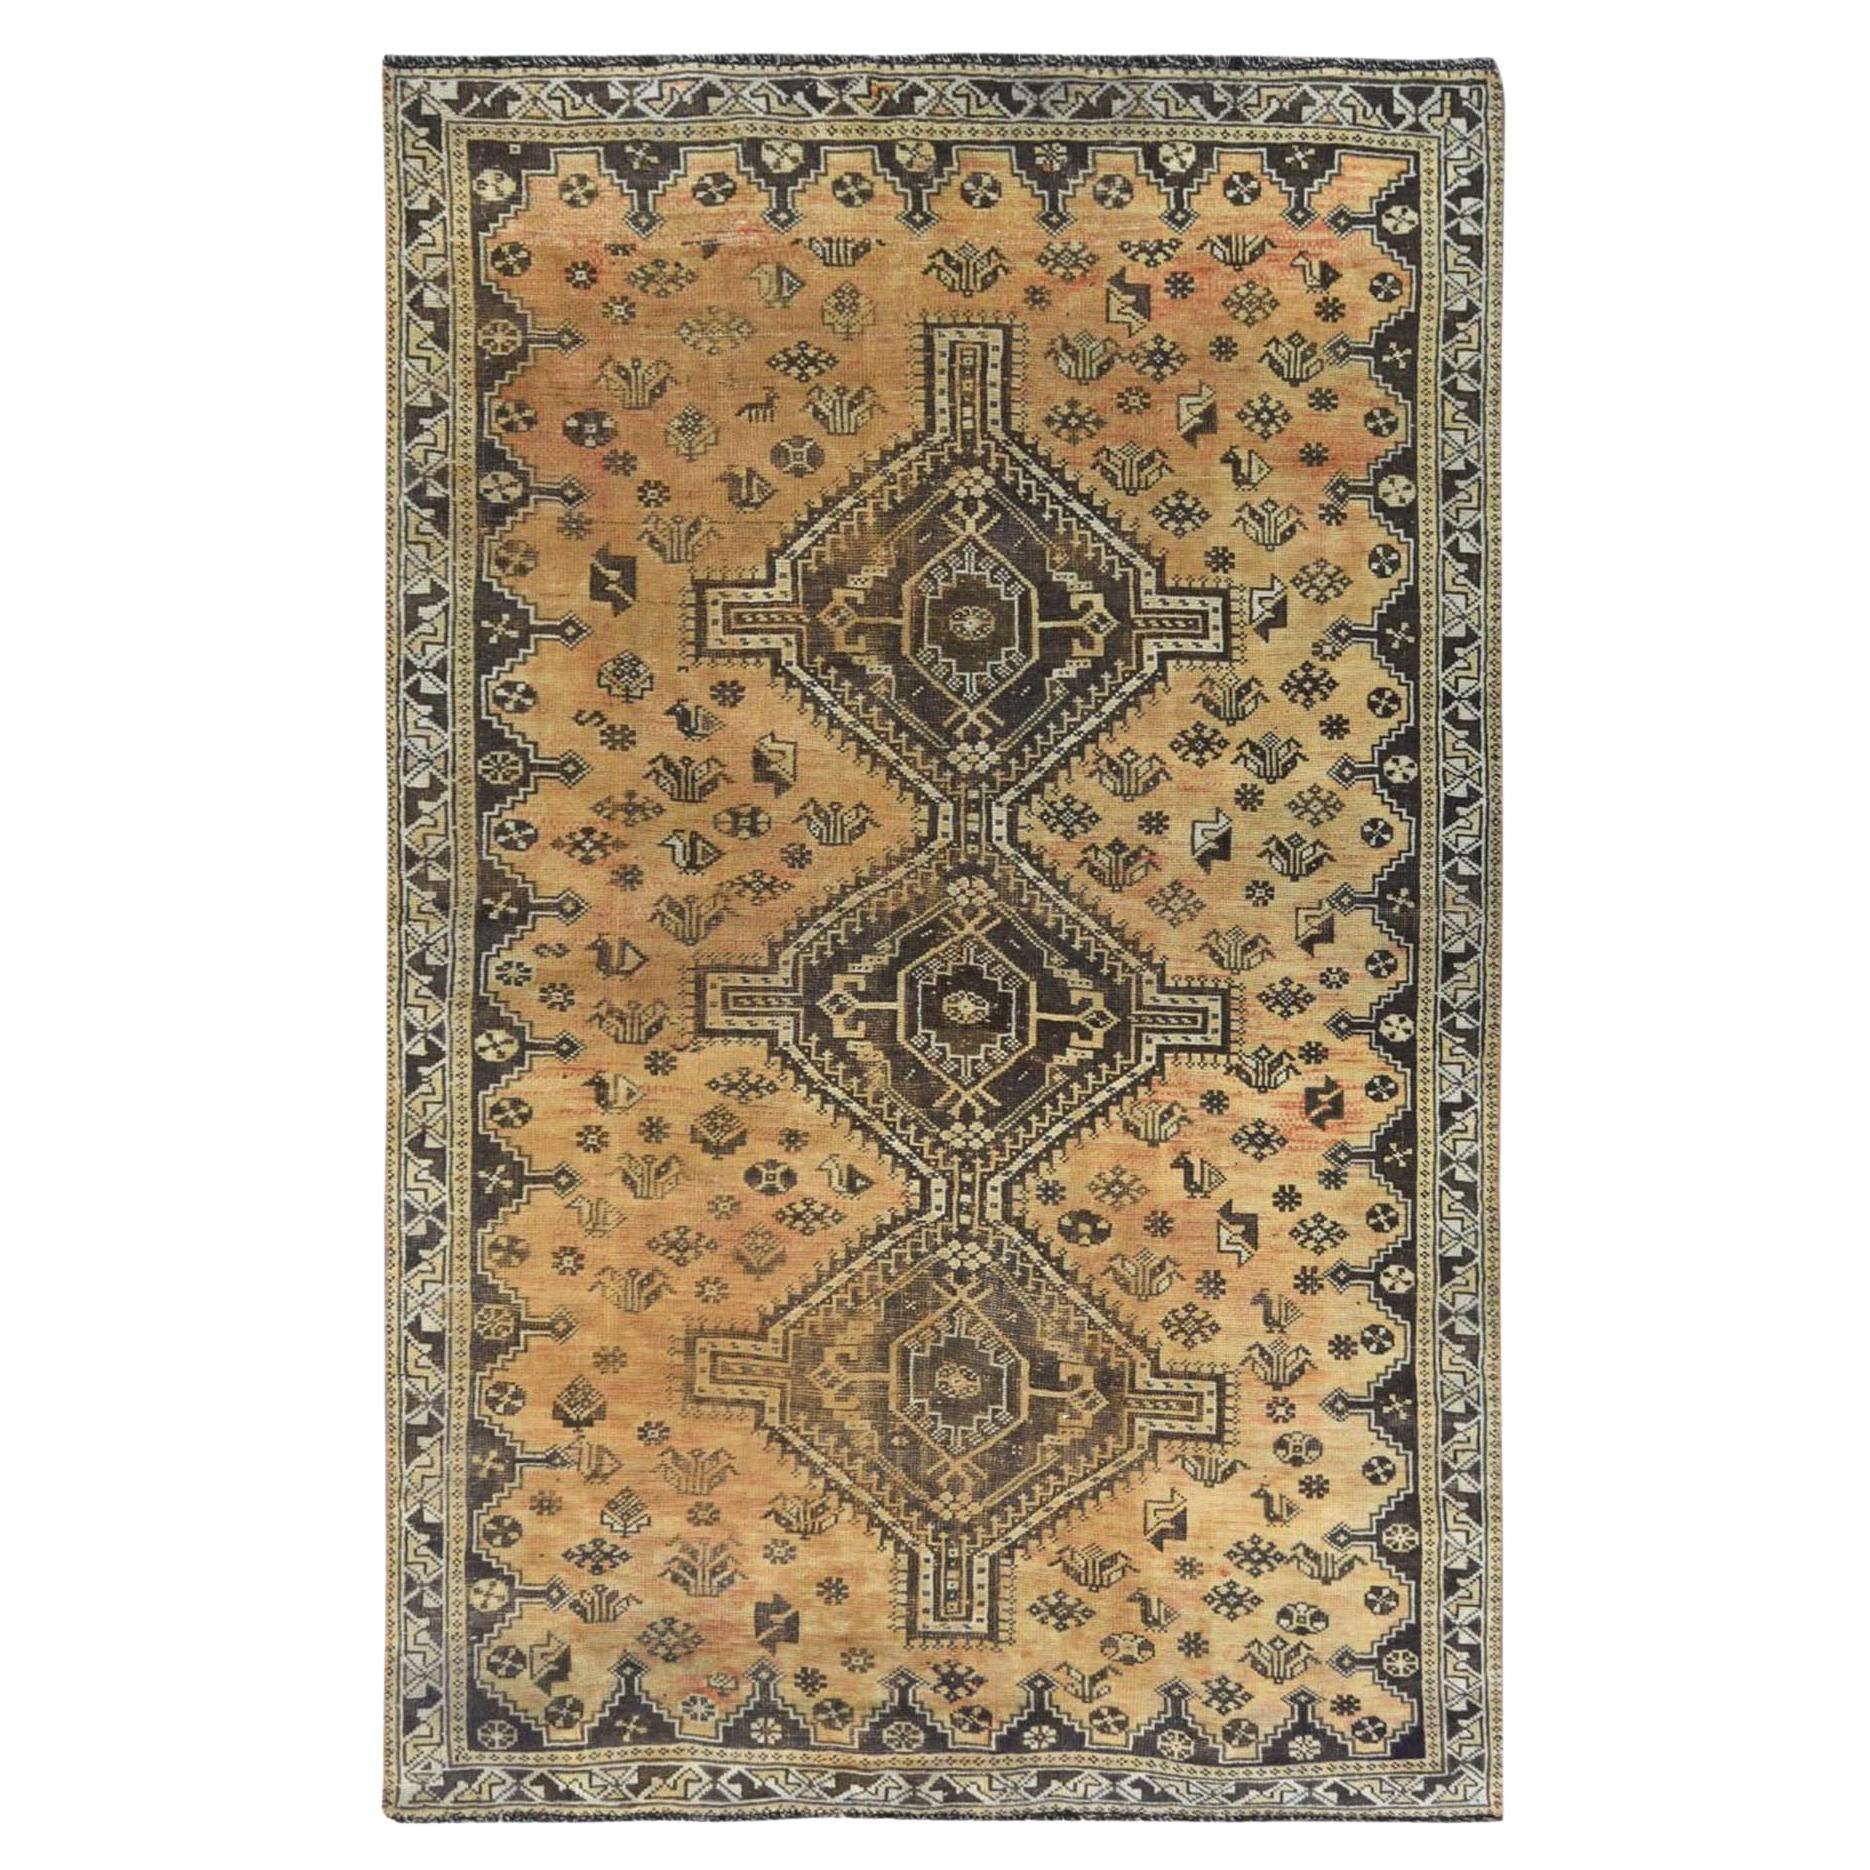 Gold Color, Distressed Look Worn Wool Hand Knotted, Vintage Persian Shiraz Rug